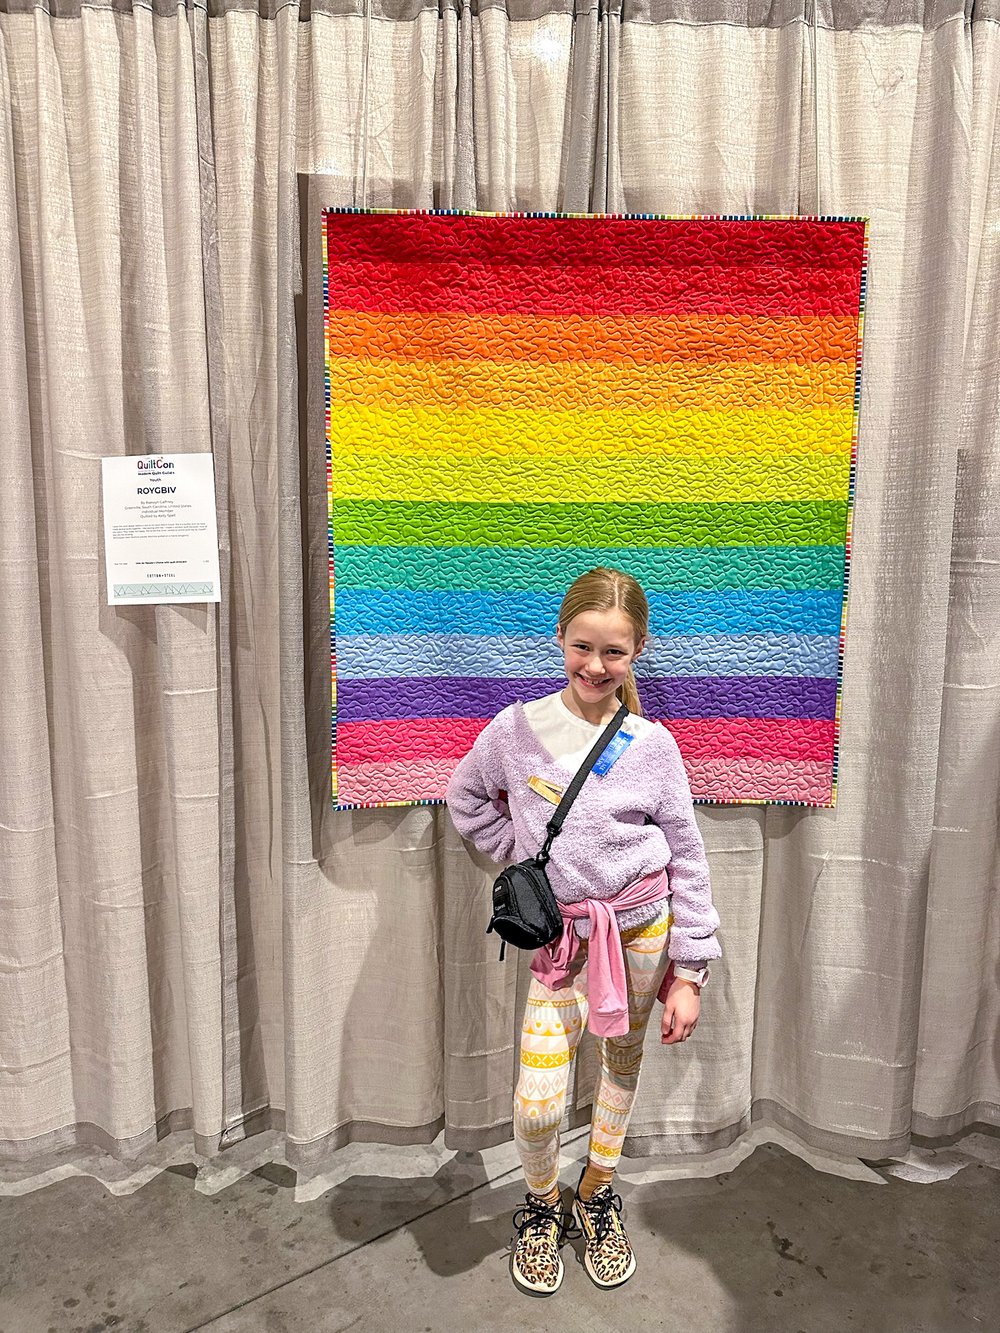 My niece had a quilt hanging in the Youth category